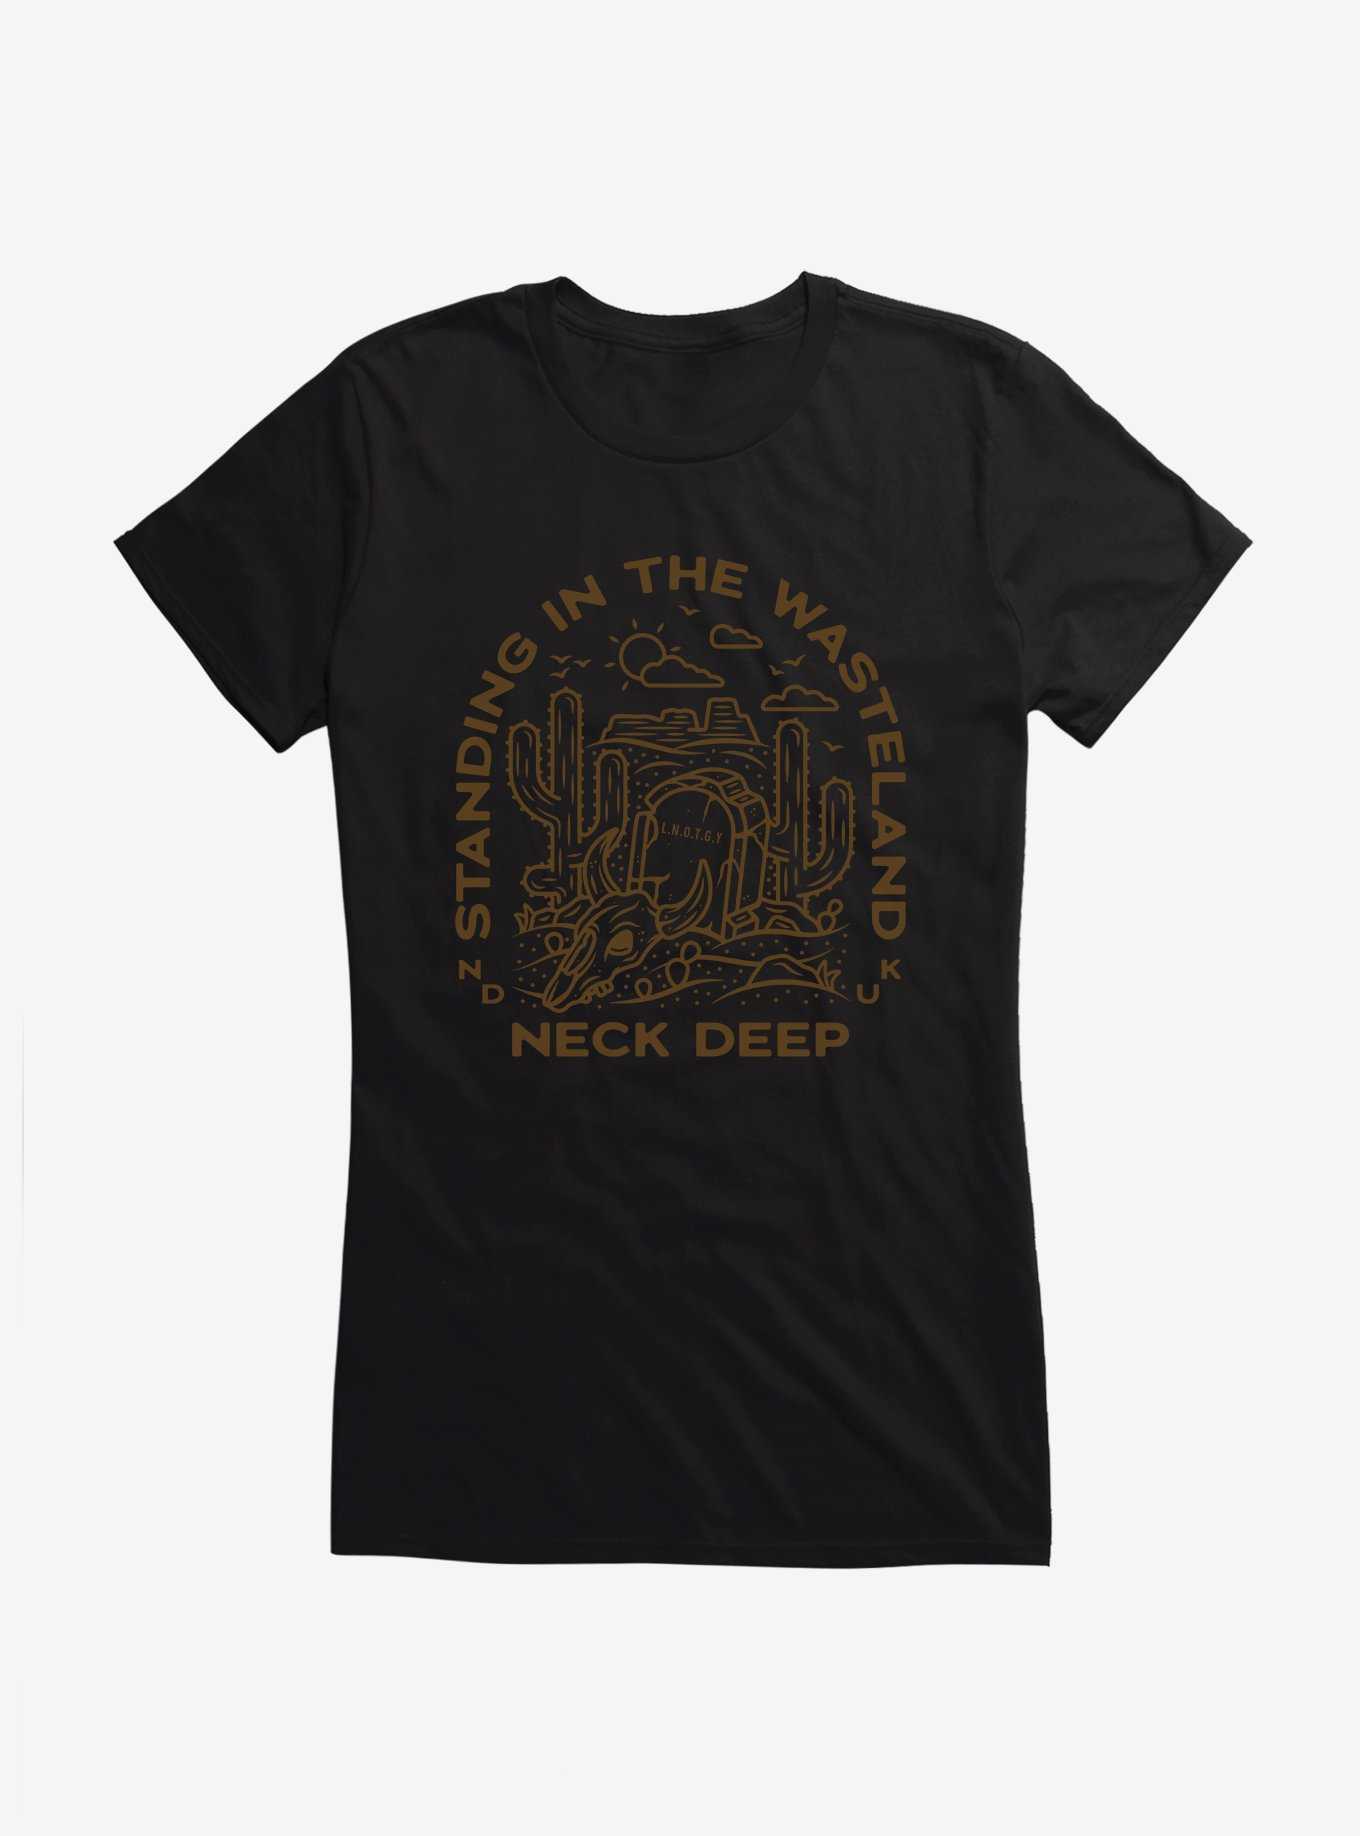 Neck Deep Standing In The Wasteland Girls T-Shirt , , hi-res